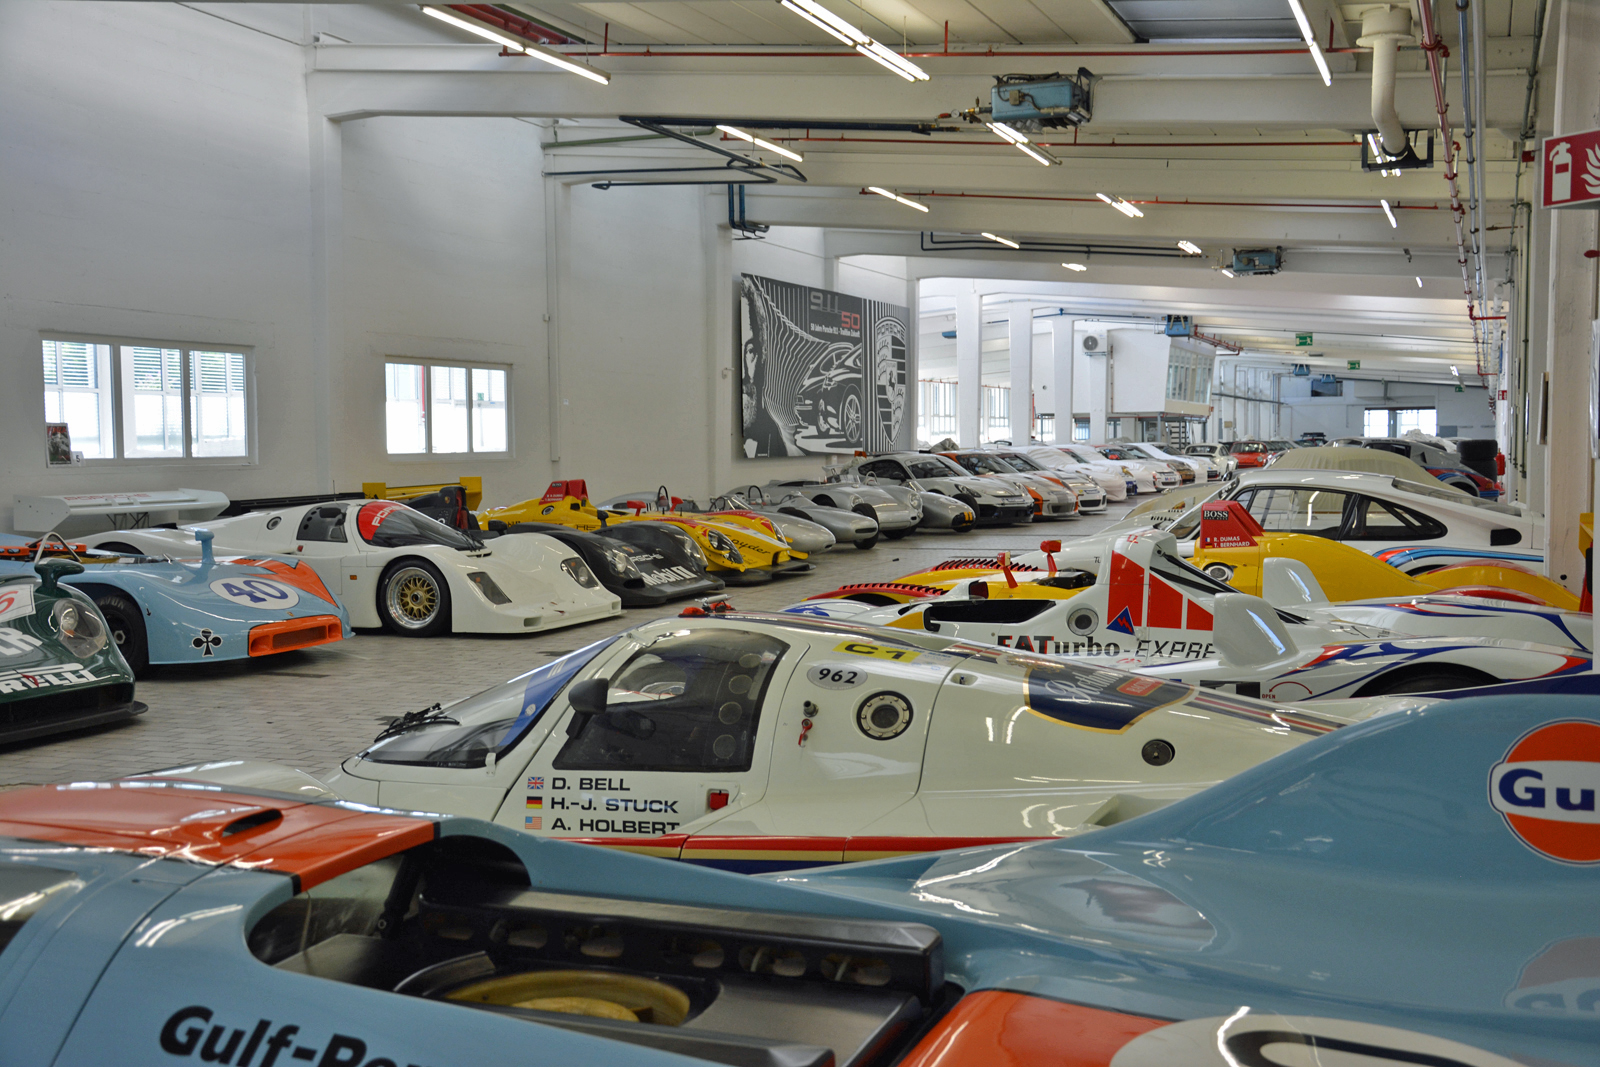 <p>Racing has defined Porsche since its earliest days, so it comes as no surprise that a large chunk of the warehouse is reserved for the company’s race cars. Endurance racers that triumphed at <strong>Le Mans</strong> share the floor with dusty rally cars and eye-catching one-offs built for world record attempts.</p>